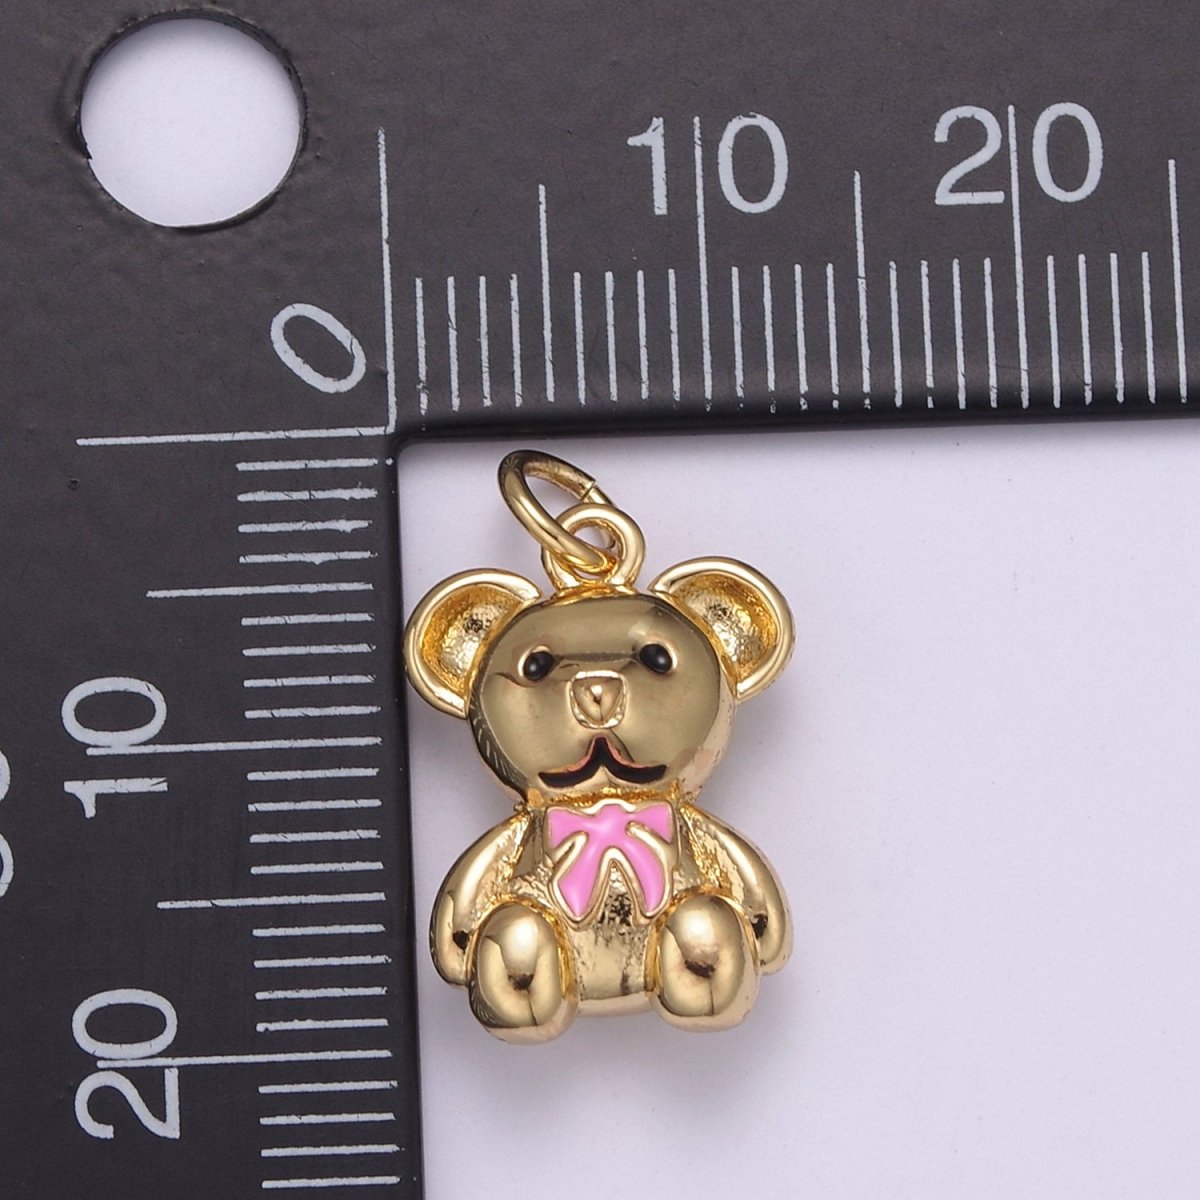 Dainty 14k Gold Filled Teddy Bear Charm with Pink / Green Ribbon Mini Bear Pendant for Bracelet Necklace Earring C-206 C-212 - DLUXCA